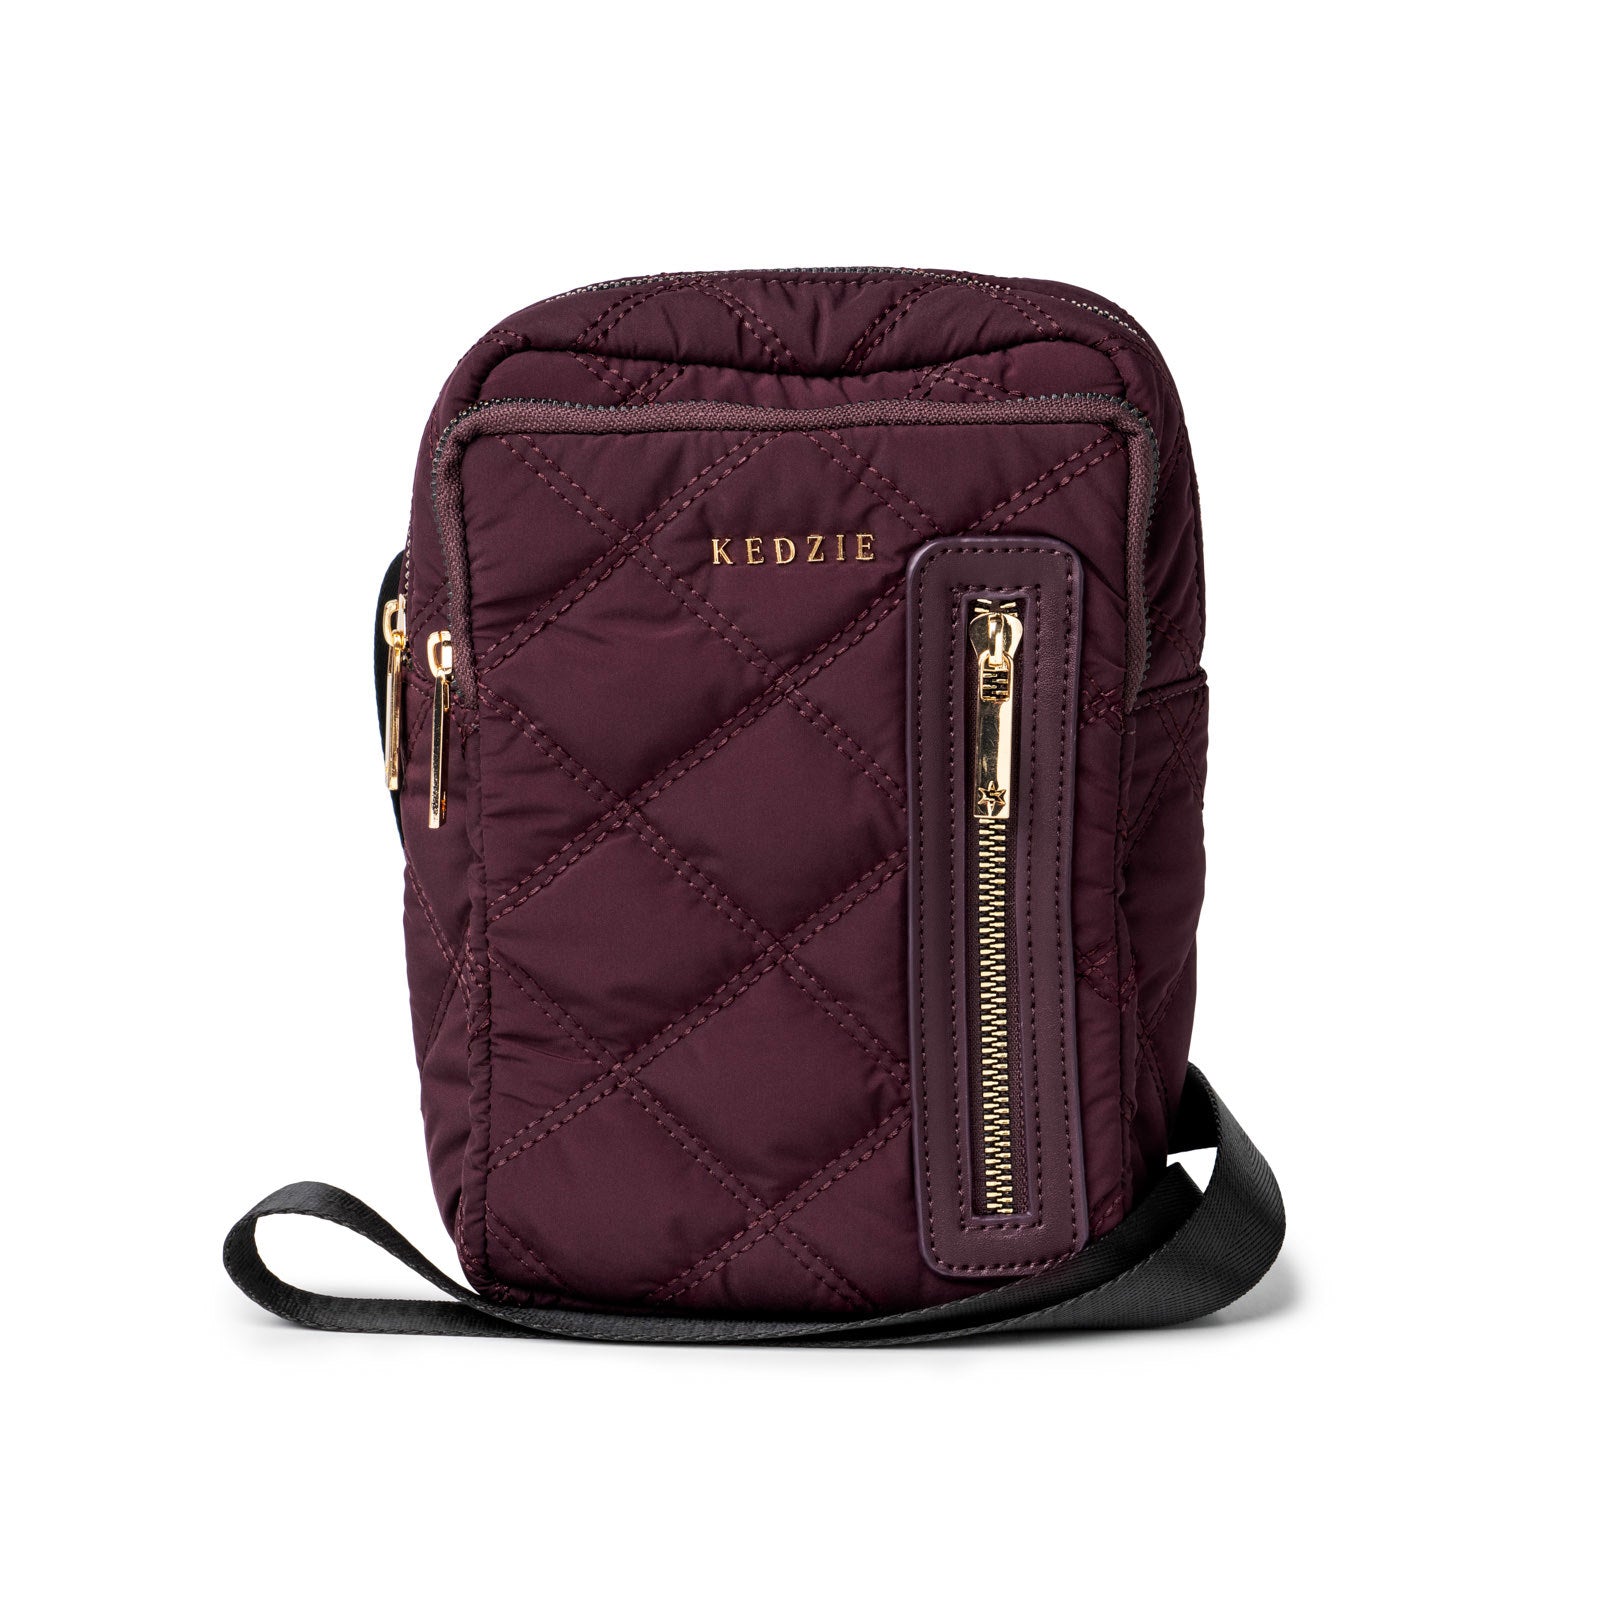 Kedzie Cloud 9 Convertible Sling - Mulberry. Convertible sling bag has an organized interior and features adjustable and removable strap to wear on the shoulder or crossbody, features large main compartment, two front pockets, three interior pockets. Includes second strap for backpack styling. Measures 6.5” W x 8” H x 2.5” D. Strap: 55” fully extended. Shop at The Painted Cottage in Edgewater, MD.